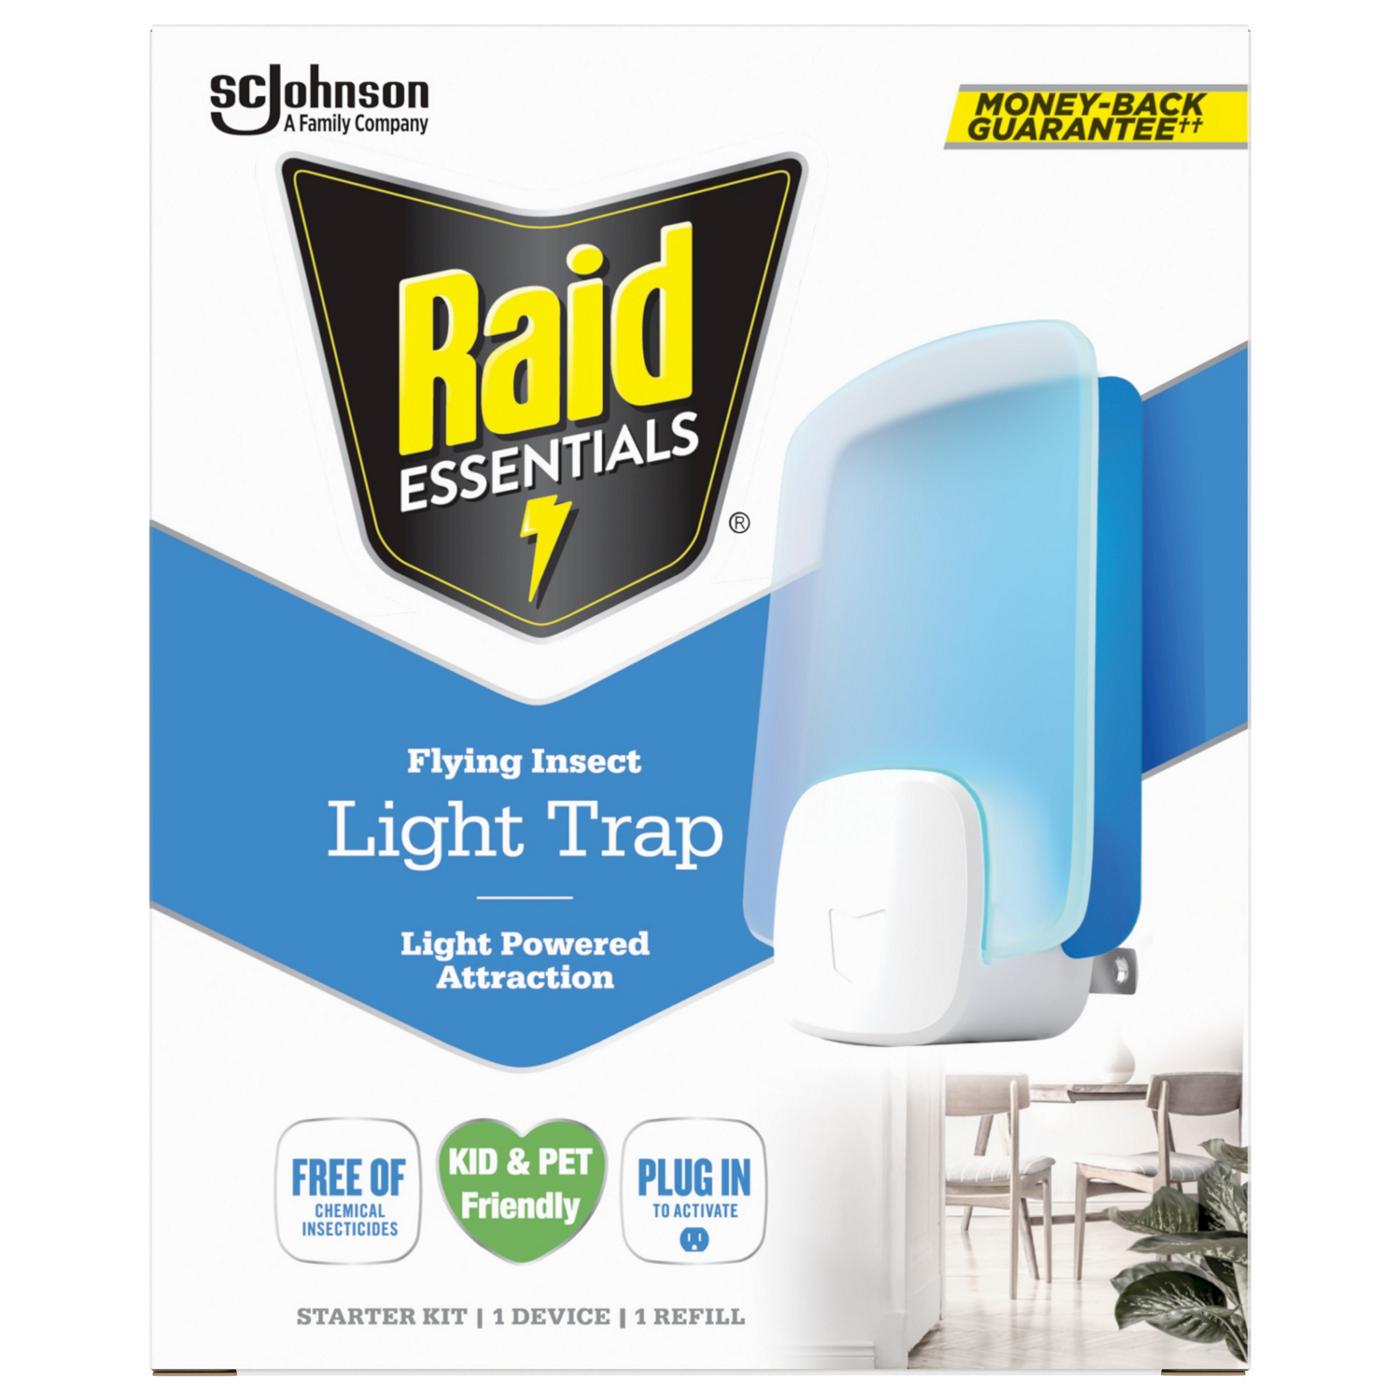 Raid Essentials Flying Insect Light Trap; image 1 of 3